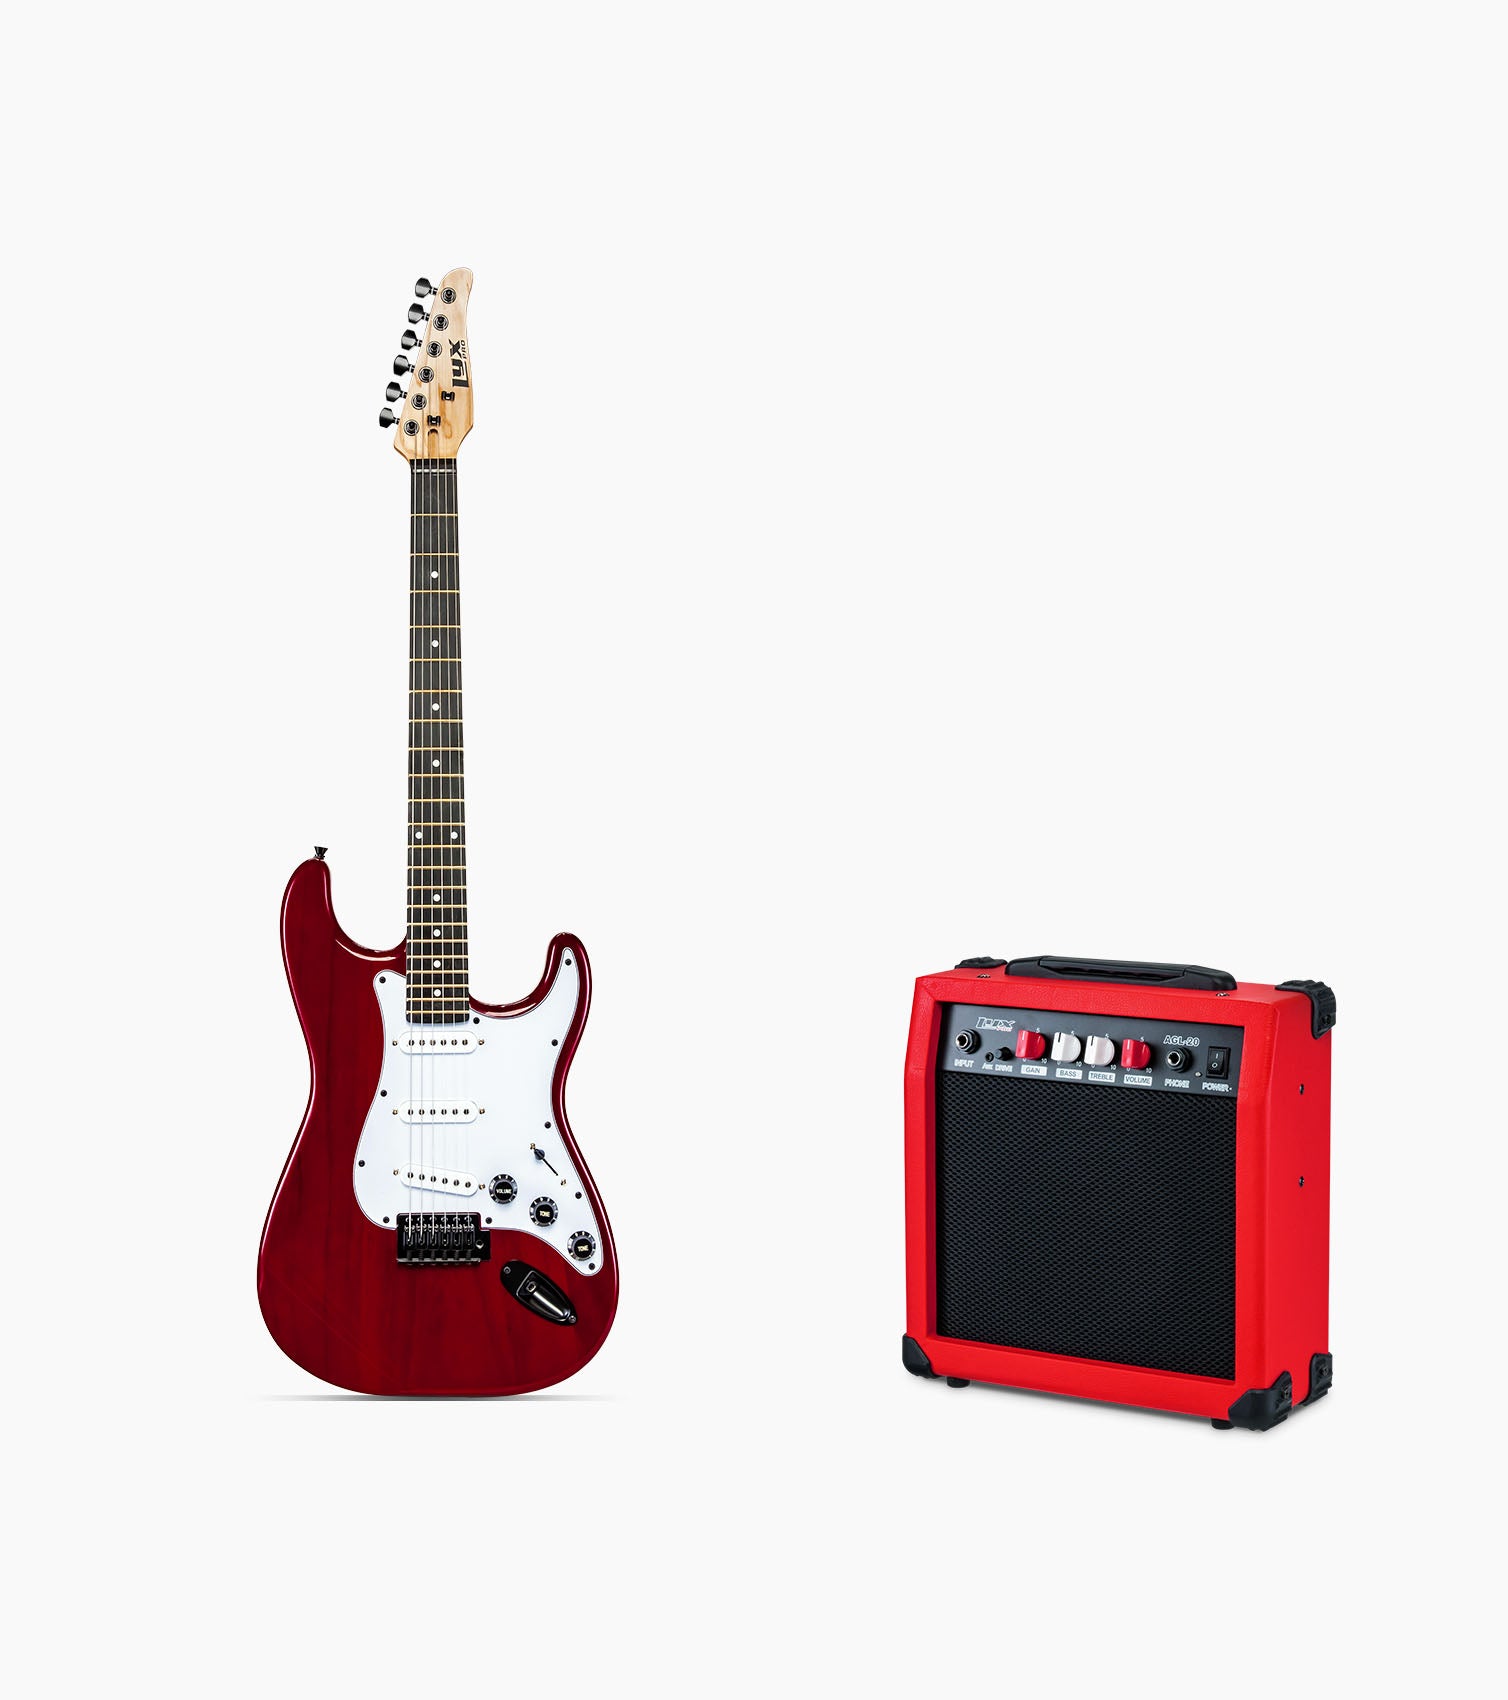 39” Red beginner electric guitar with amp